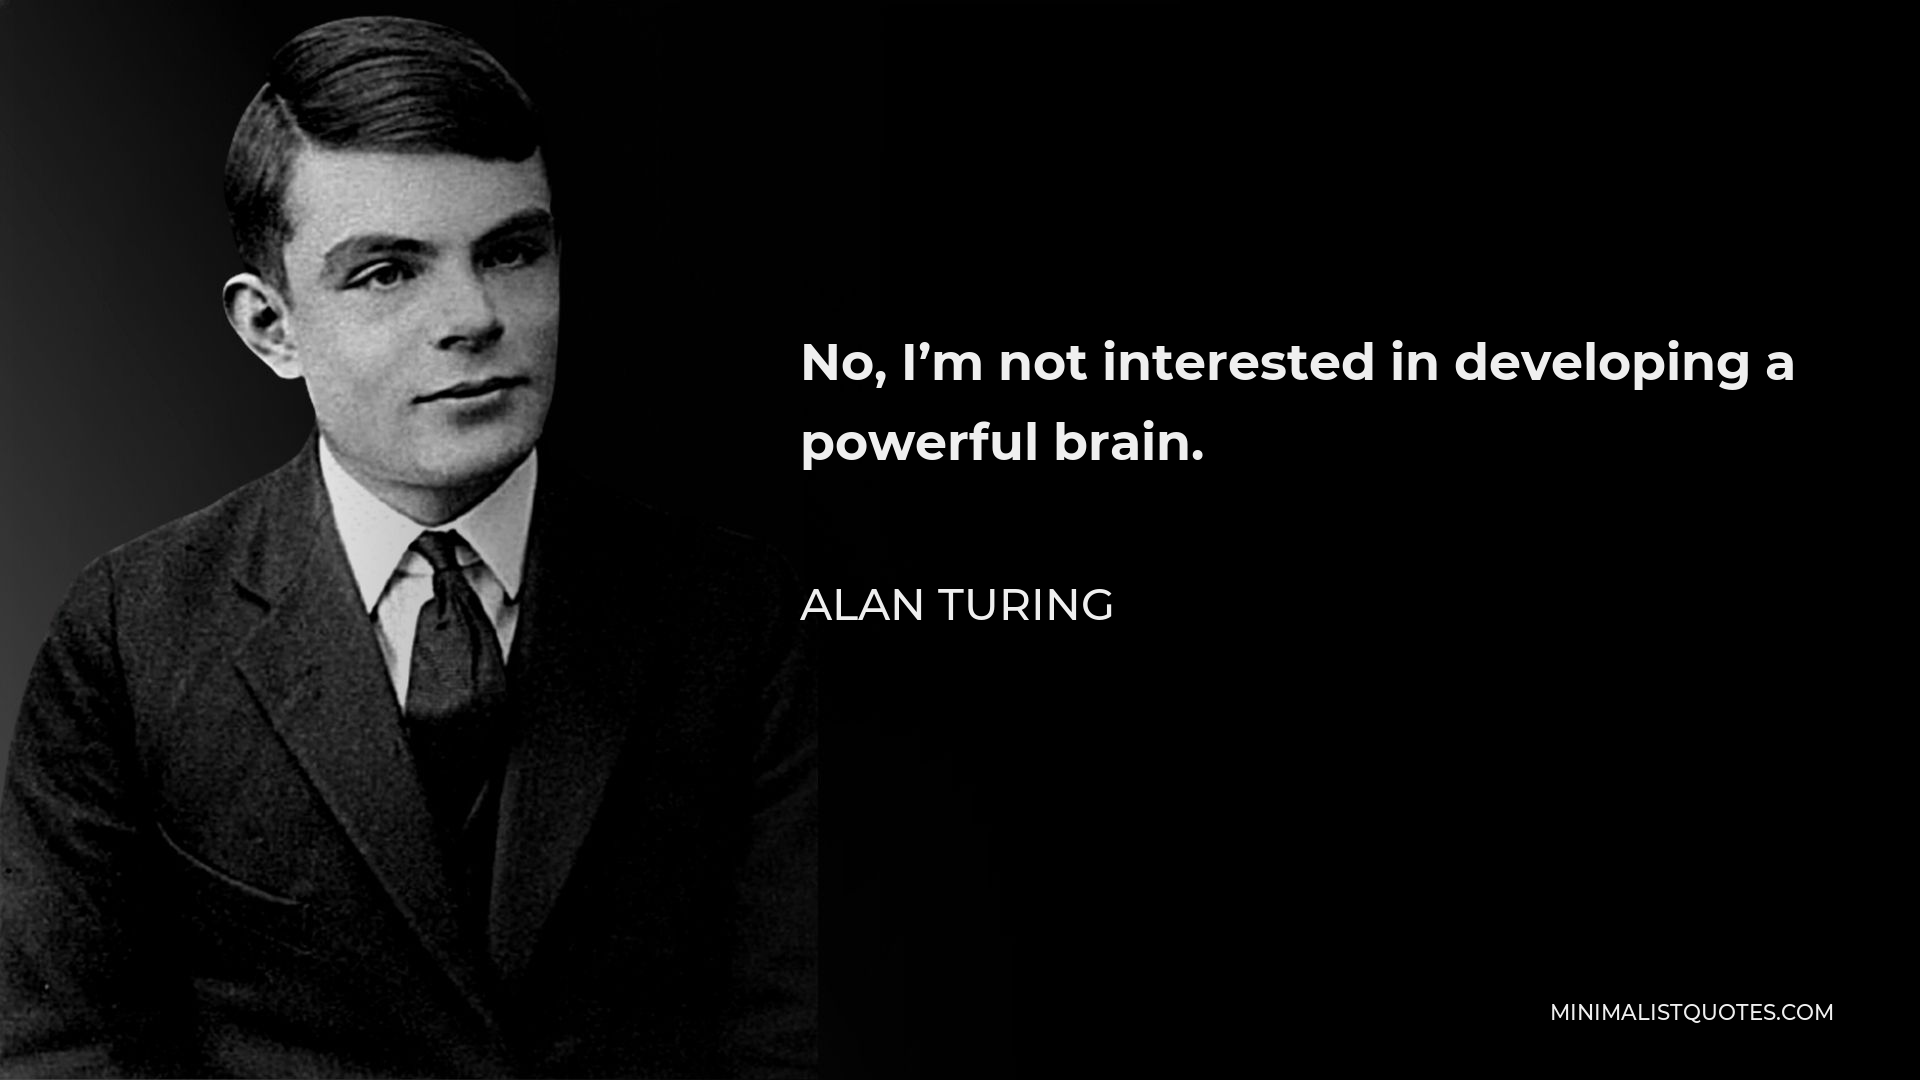 Alan Turing Quote - No, I’m not interested in developing a powerful brain. All I’m after is just a mediocre brain, something like the President of the American Telephone and Telegraph Company.